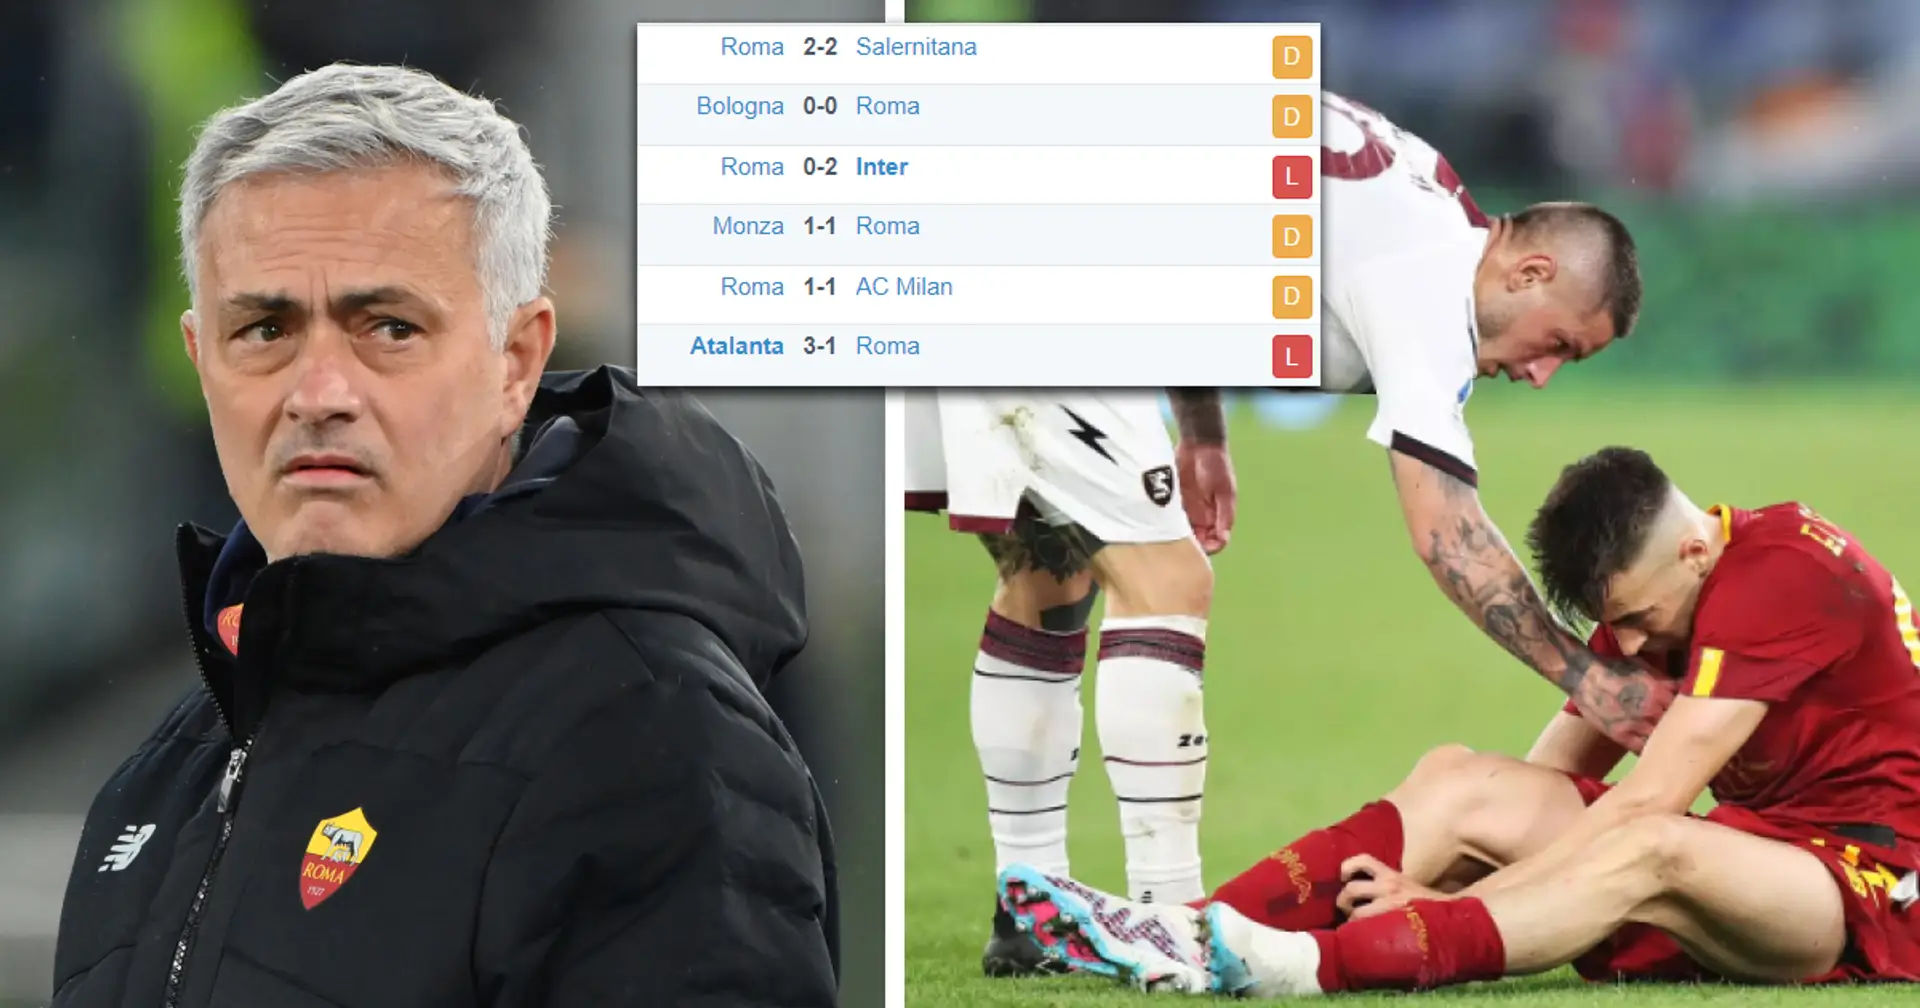 Mourinho winless for 6 game in a row for first time in his career